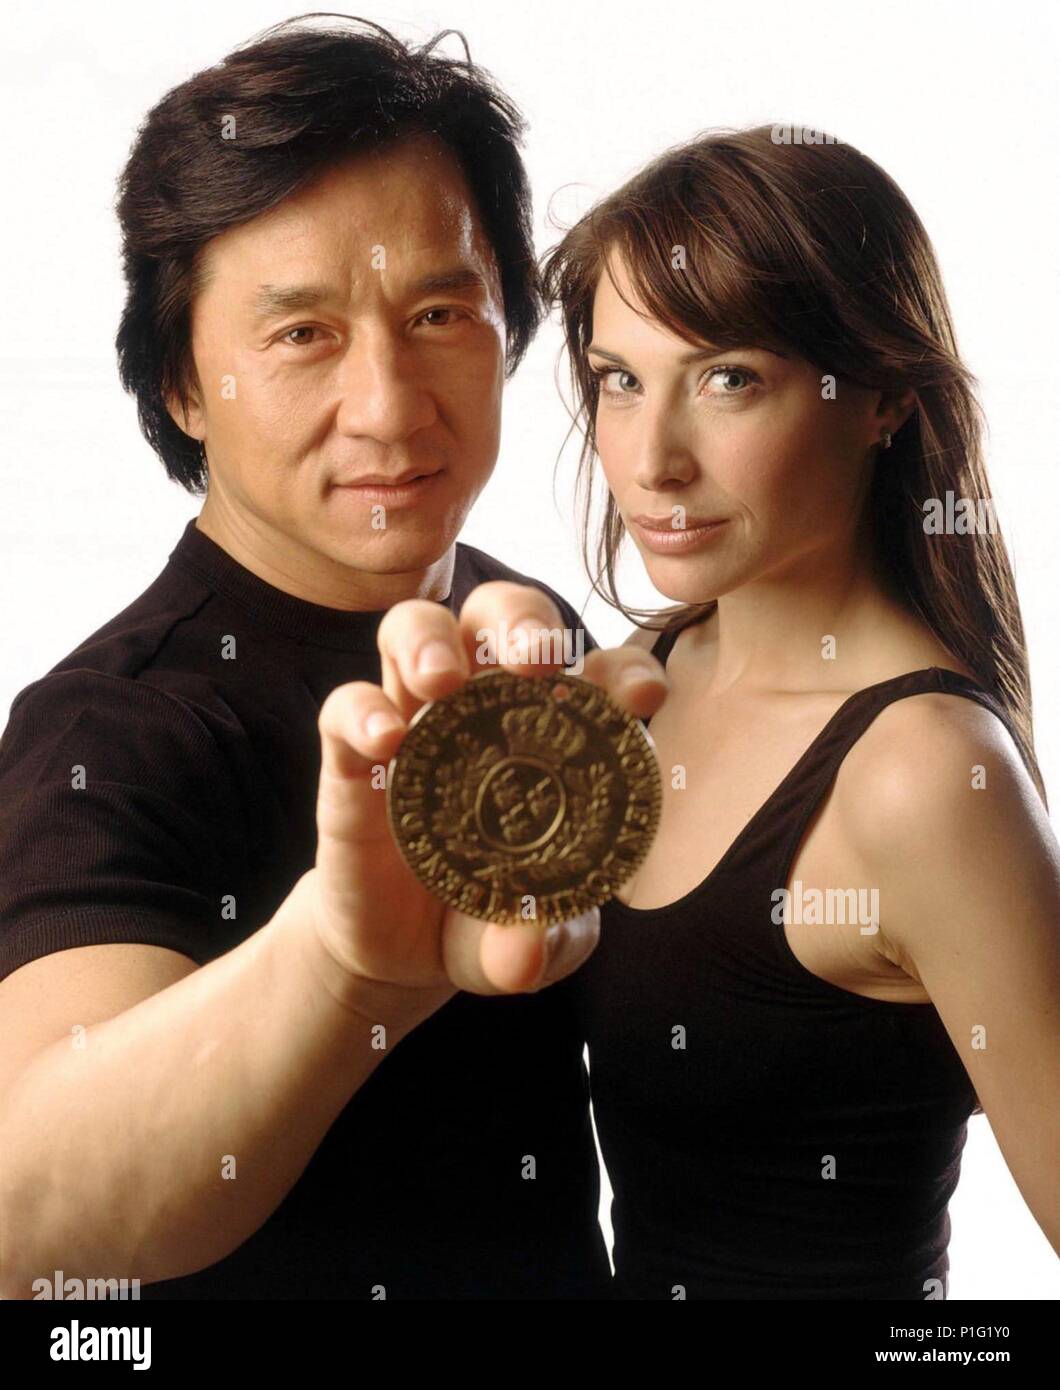 Original Film Title: THE MEDALLION.  English Title: THE MEDALLION.  Film Director: GORDON CHAN.  Year: 2003.  Stars: JACKIE CHAN; CLAIRE FORLANI. Credit: TRI STAR PICTURES / Album Stock Photo